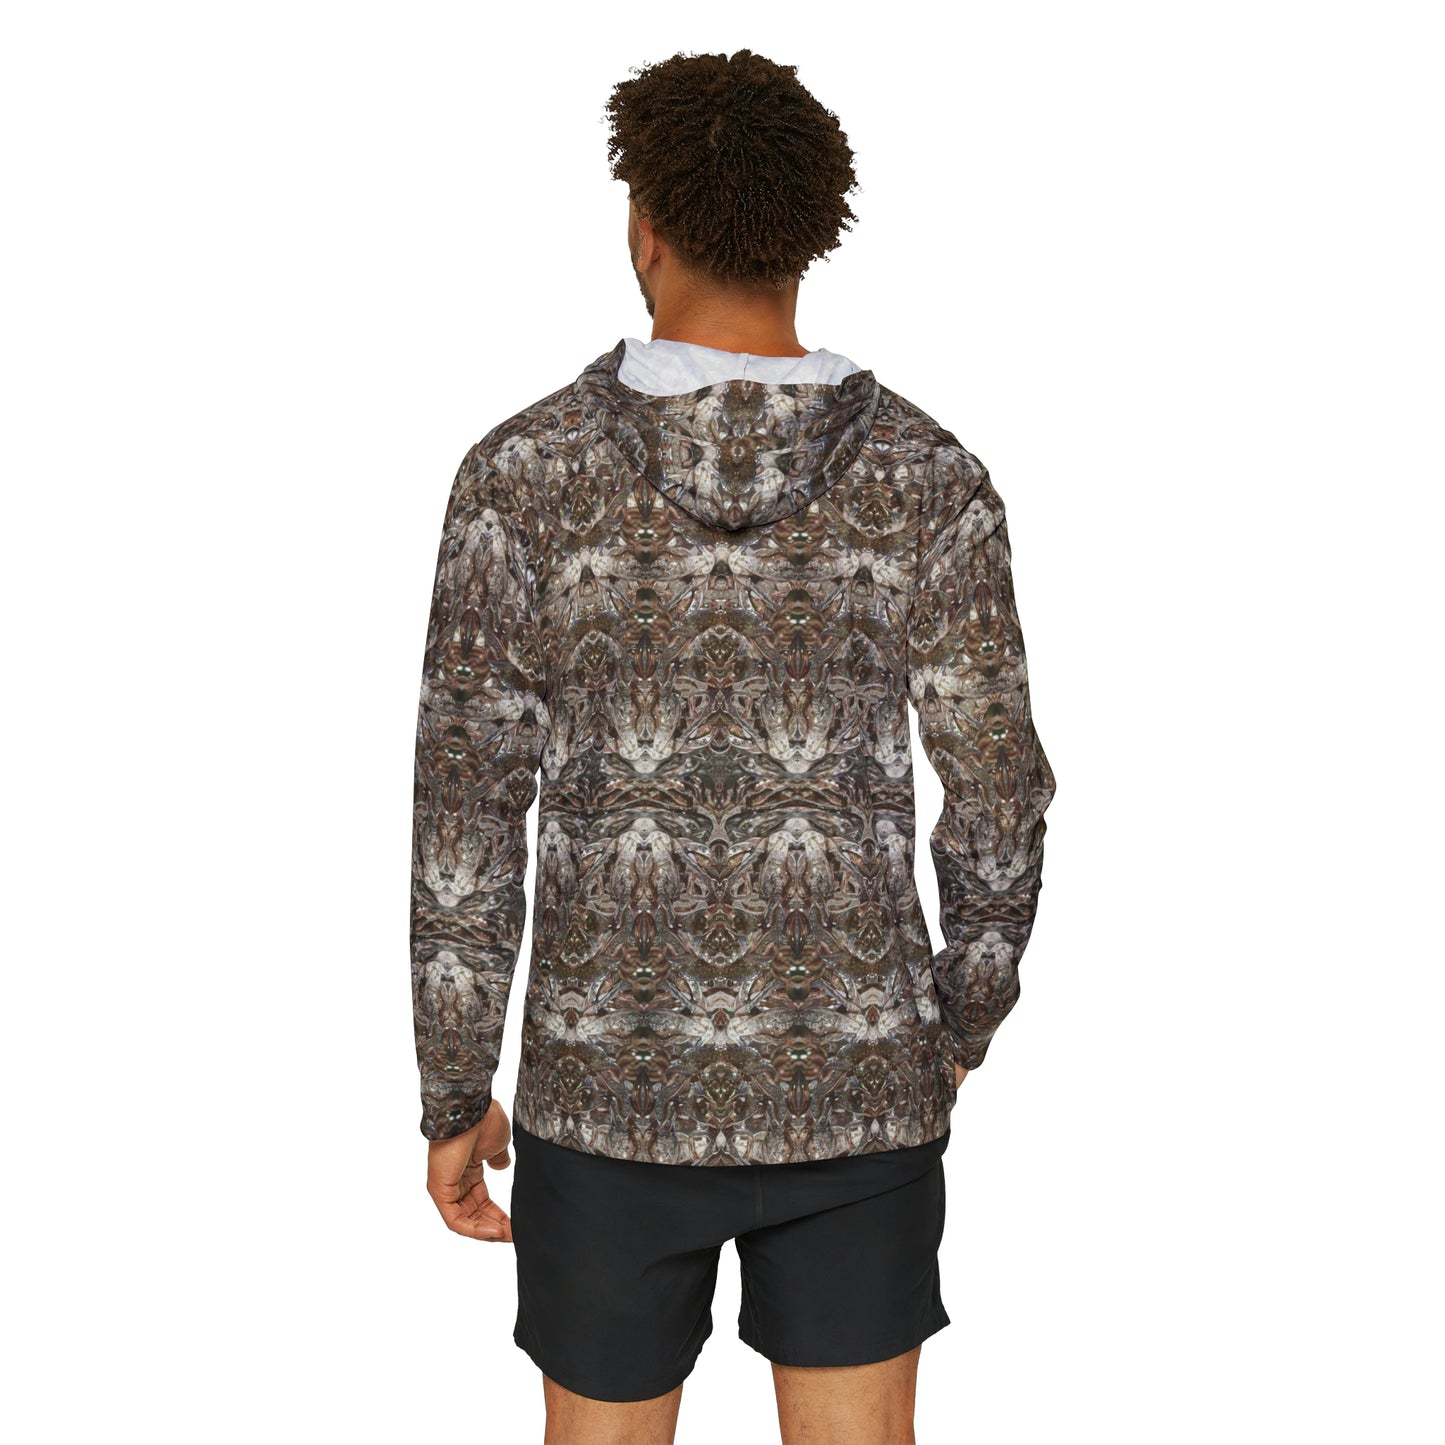 Athletic Activewear Hoodie (His/They)(Samhain Dream Thaw 10 of 15 Decem ex Quindecim) RJSTH@w2023 RJS